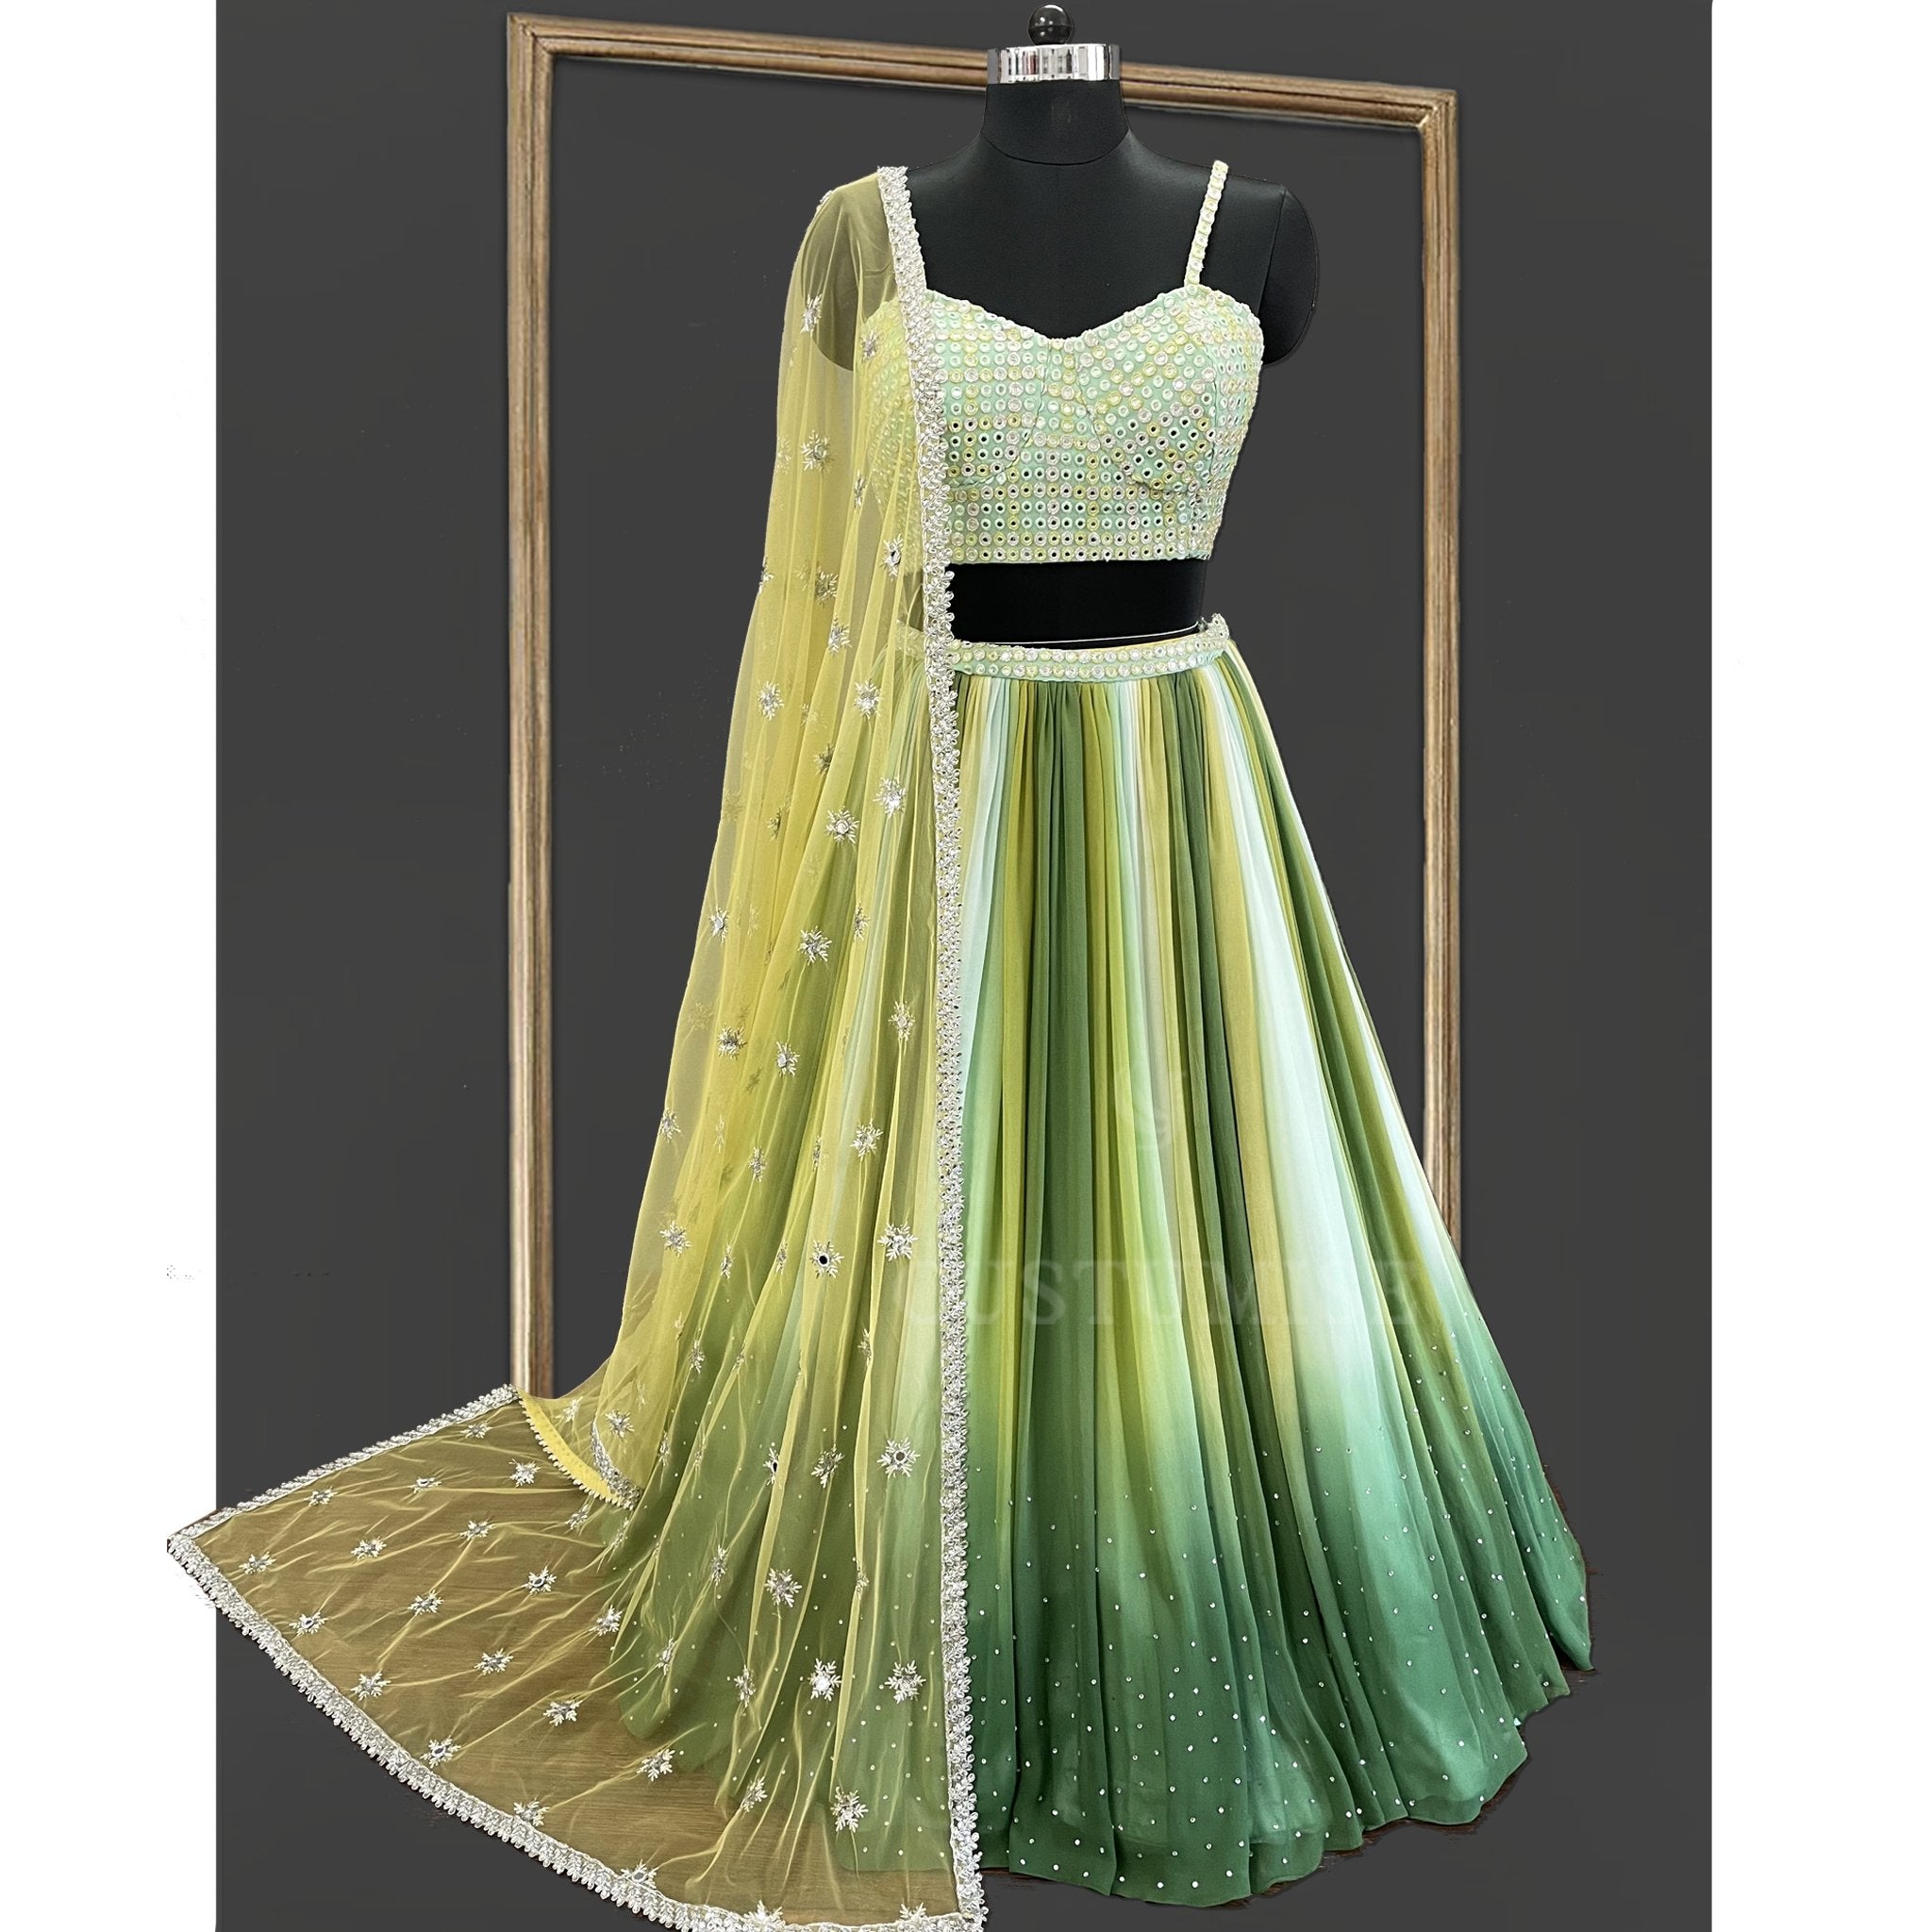 Green Ombre and Mirror Lehenga Set - Indian Designer Bridal Wedding Outfit